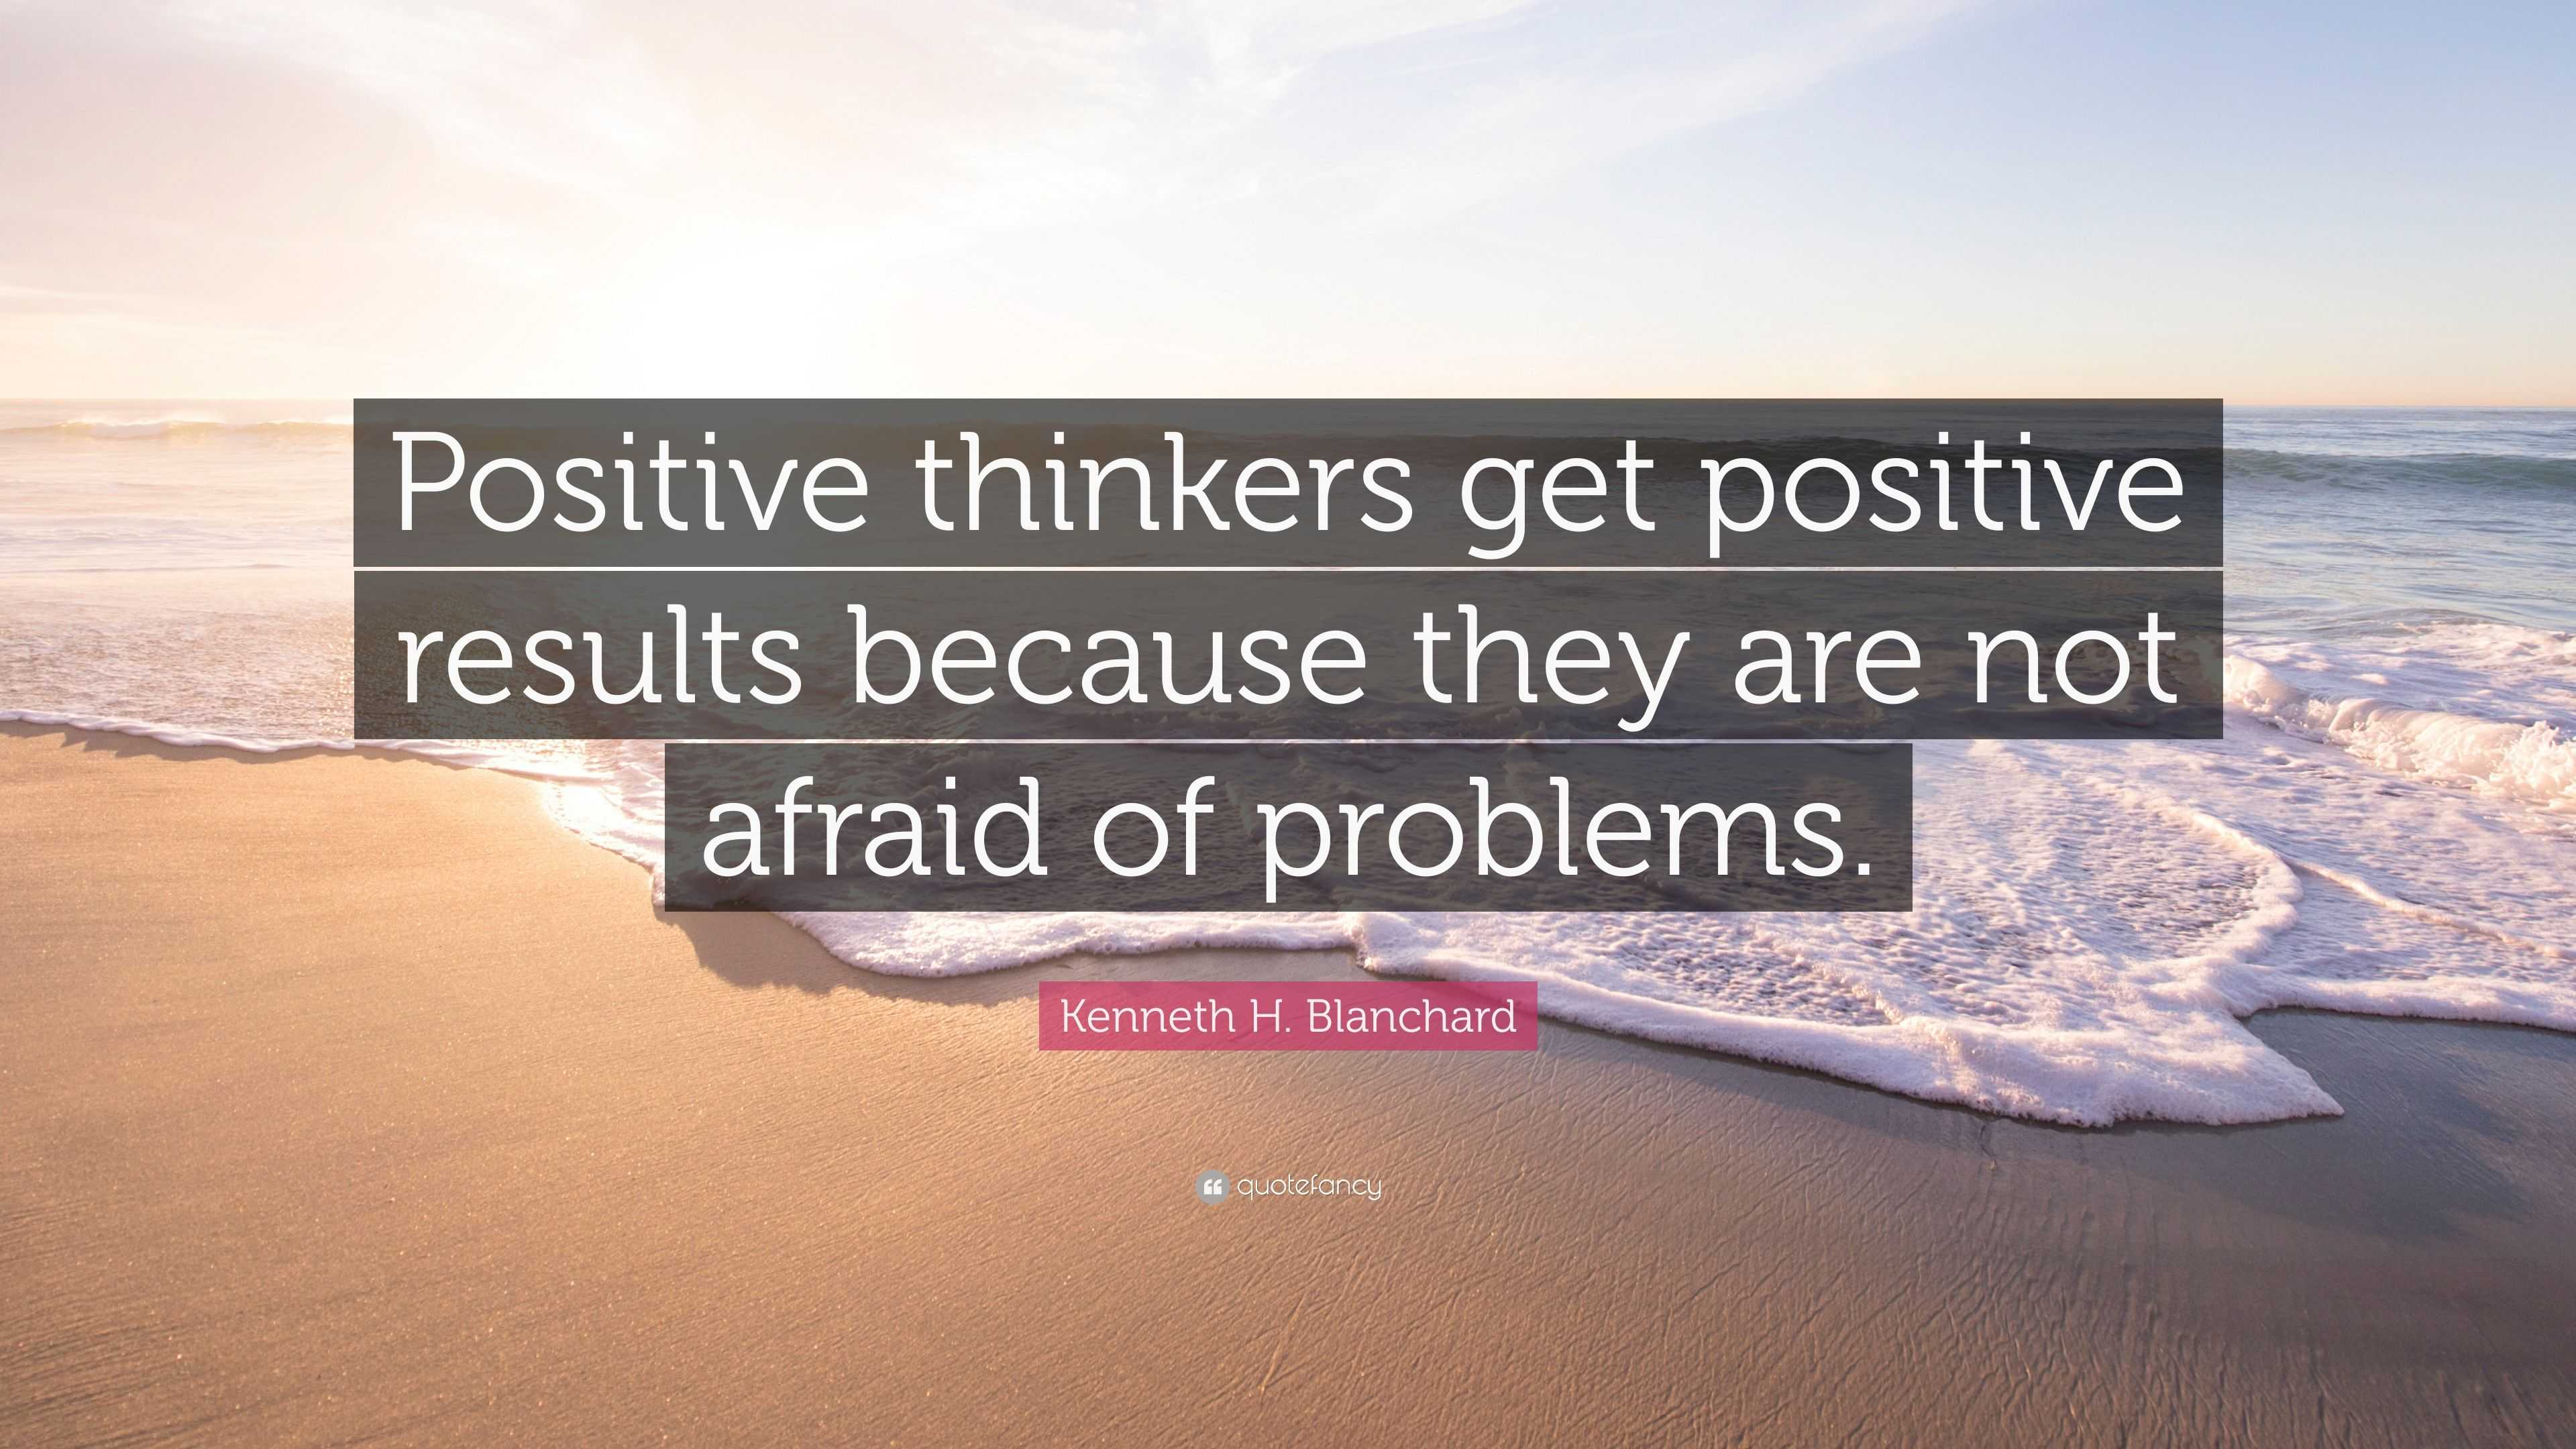 Kenneth H. Blanchard Quote: “Positive thinkers get positive results